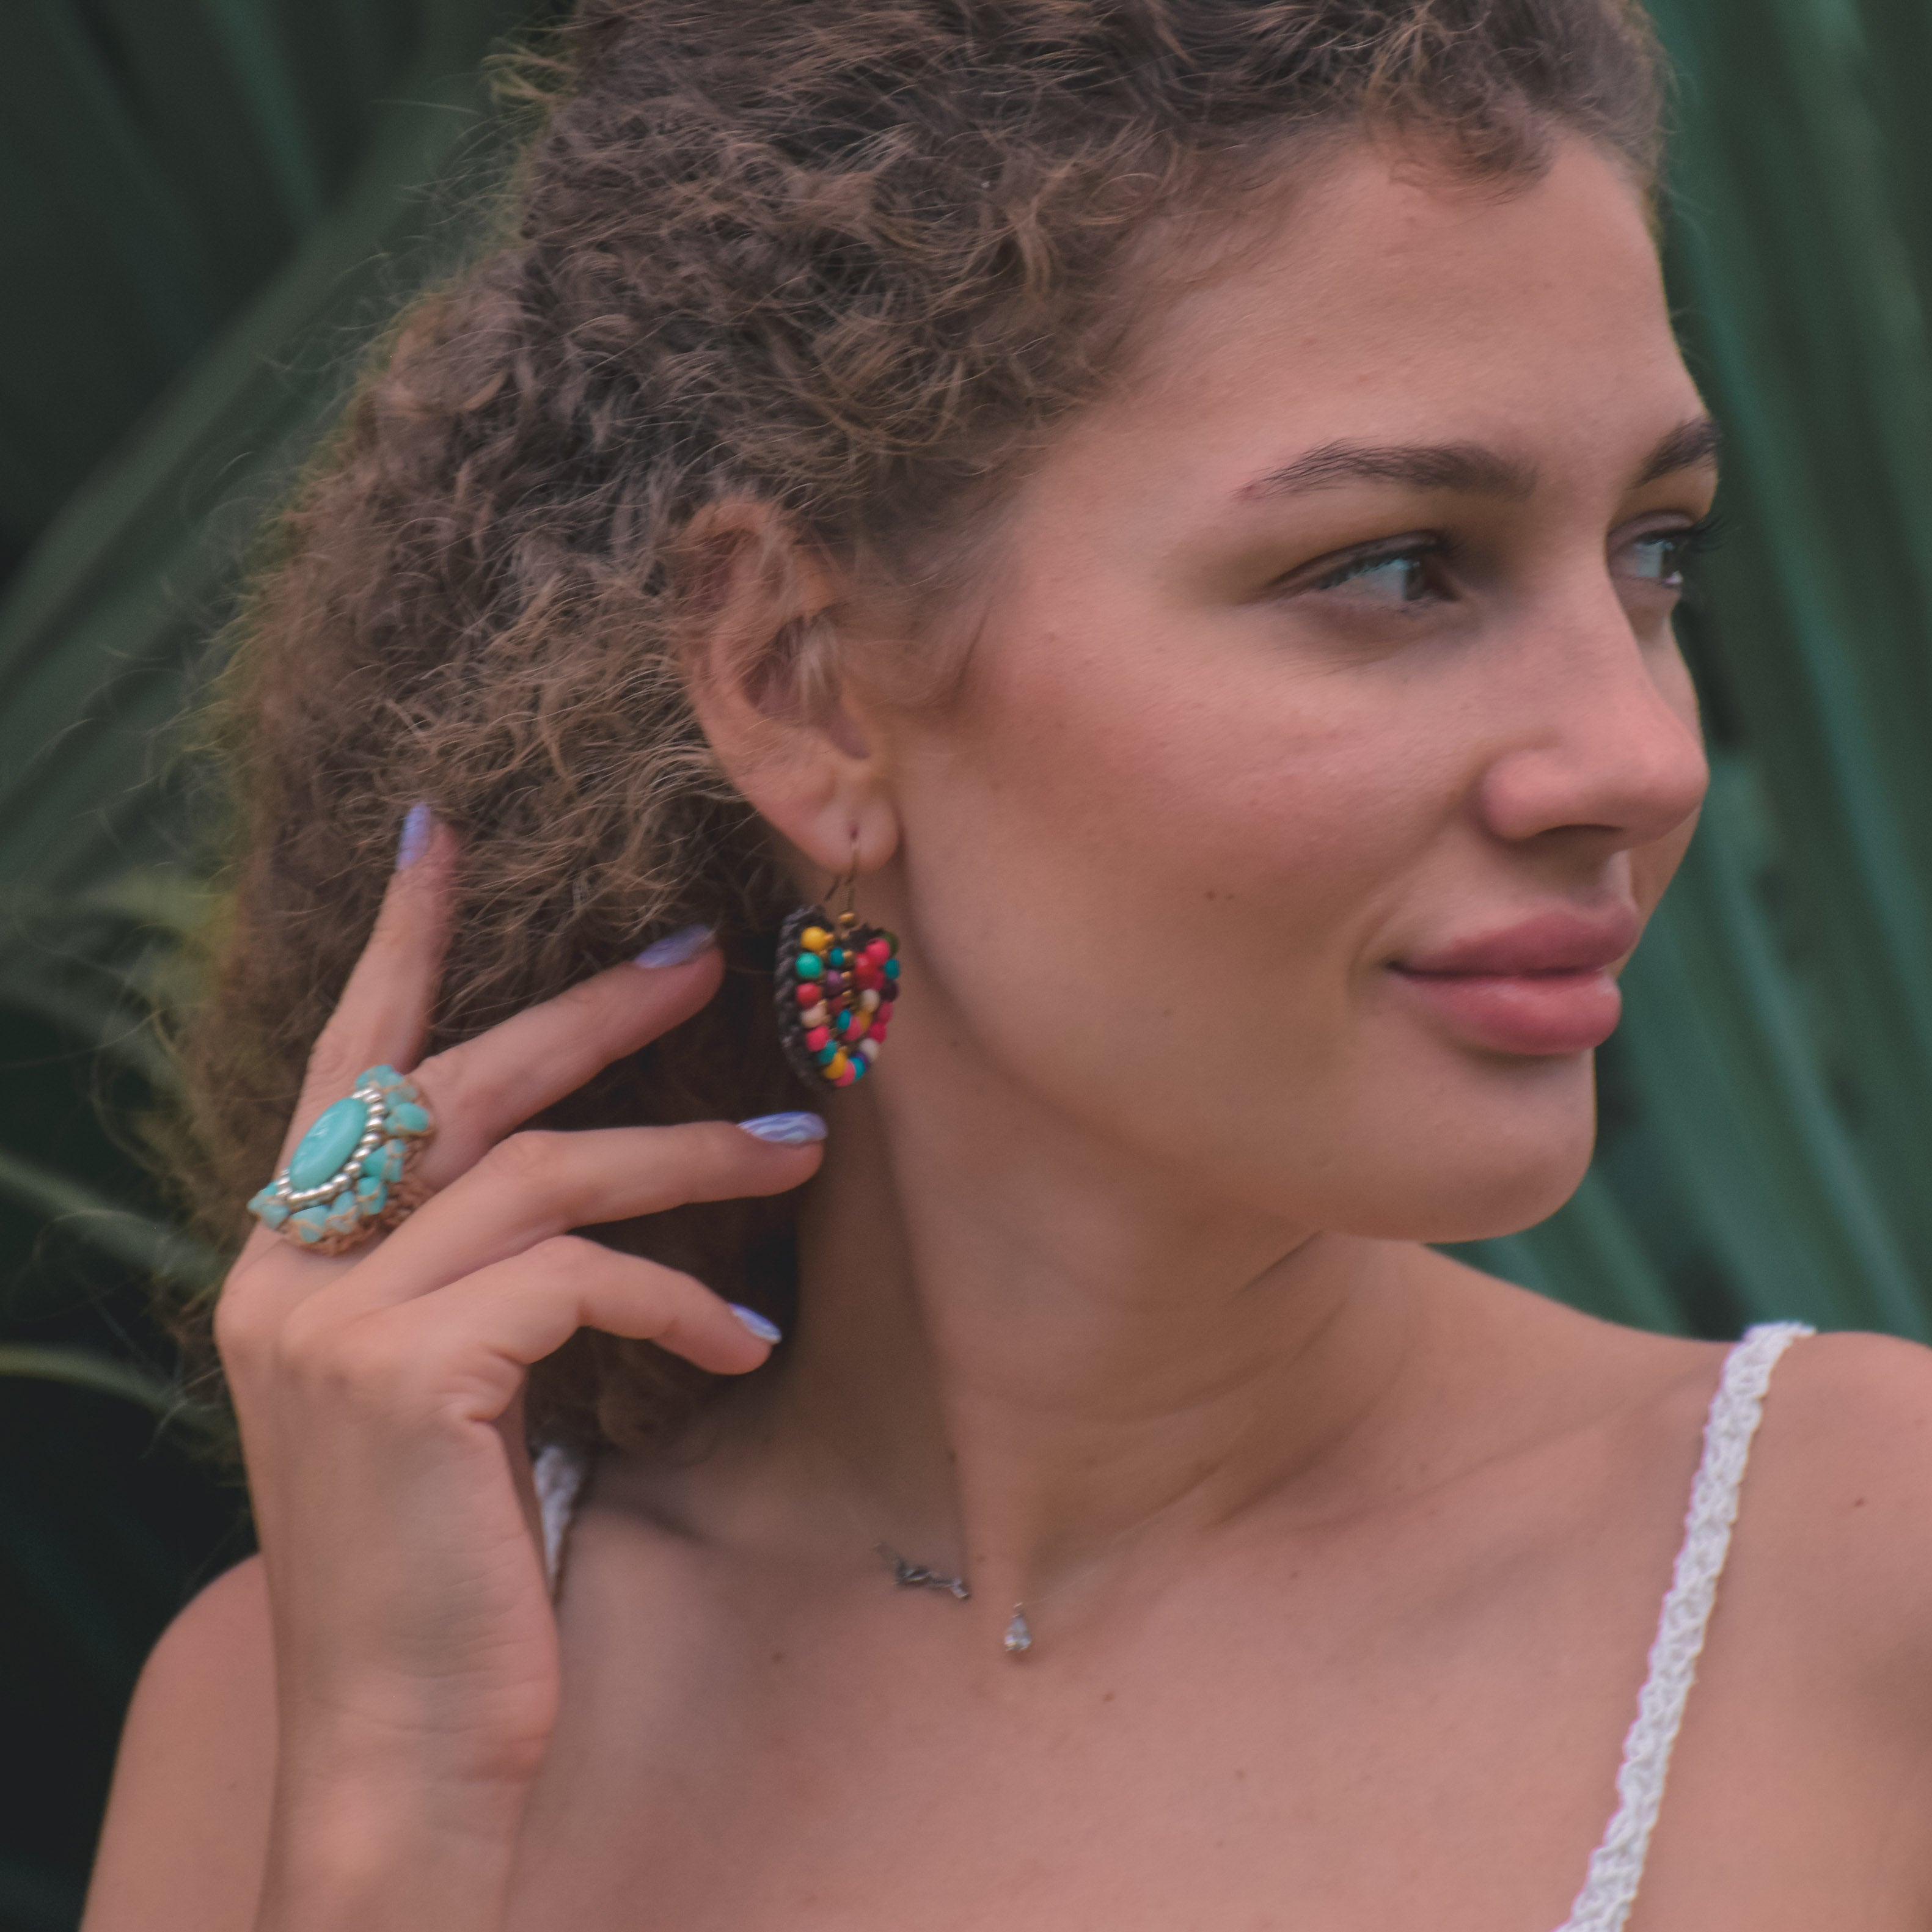 AZTEK RING Elepanta Rings - Buy Today Elephant Pants Jewelry And Bohemian Clothes Handmade In Thailand Help To Save The Elephants FairTrade And Vegan